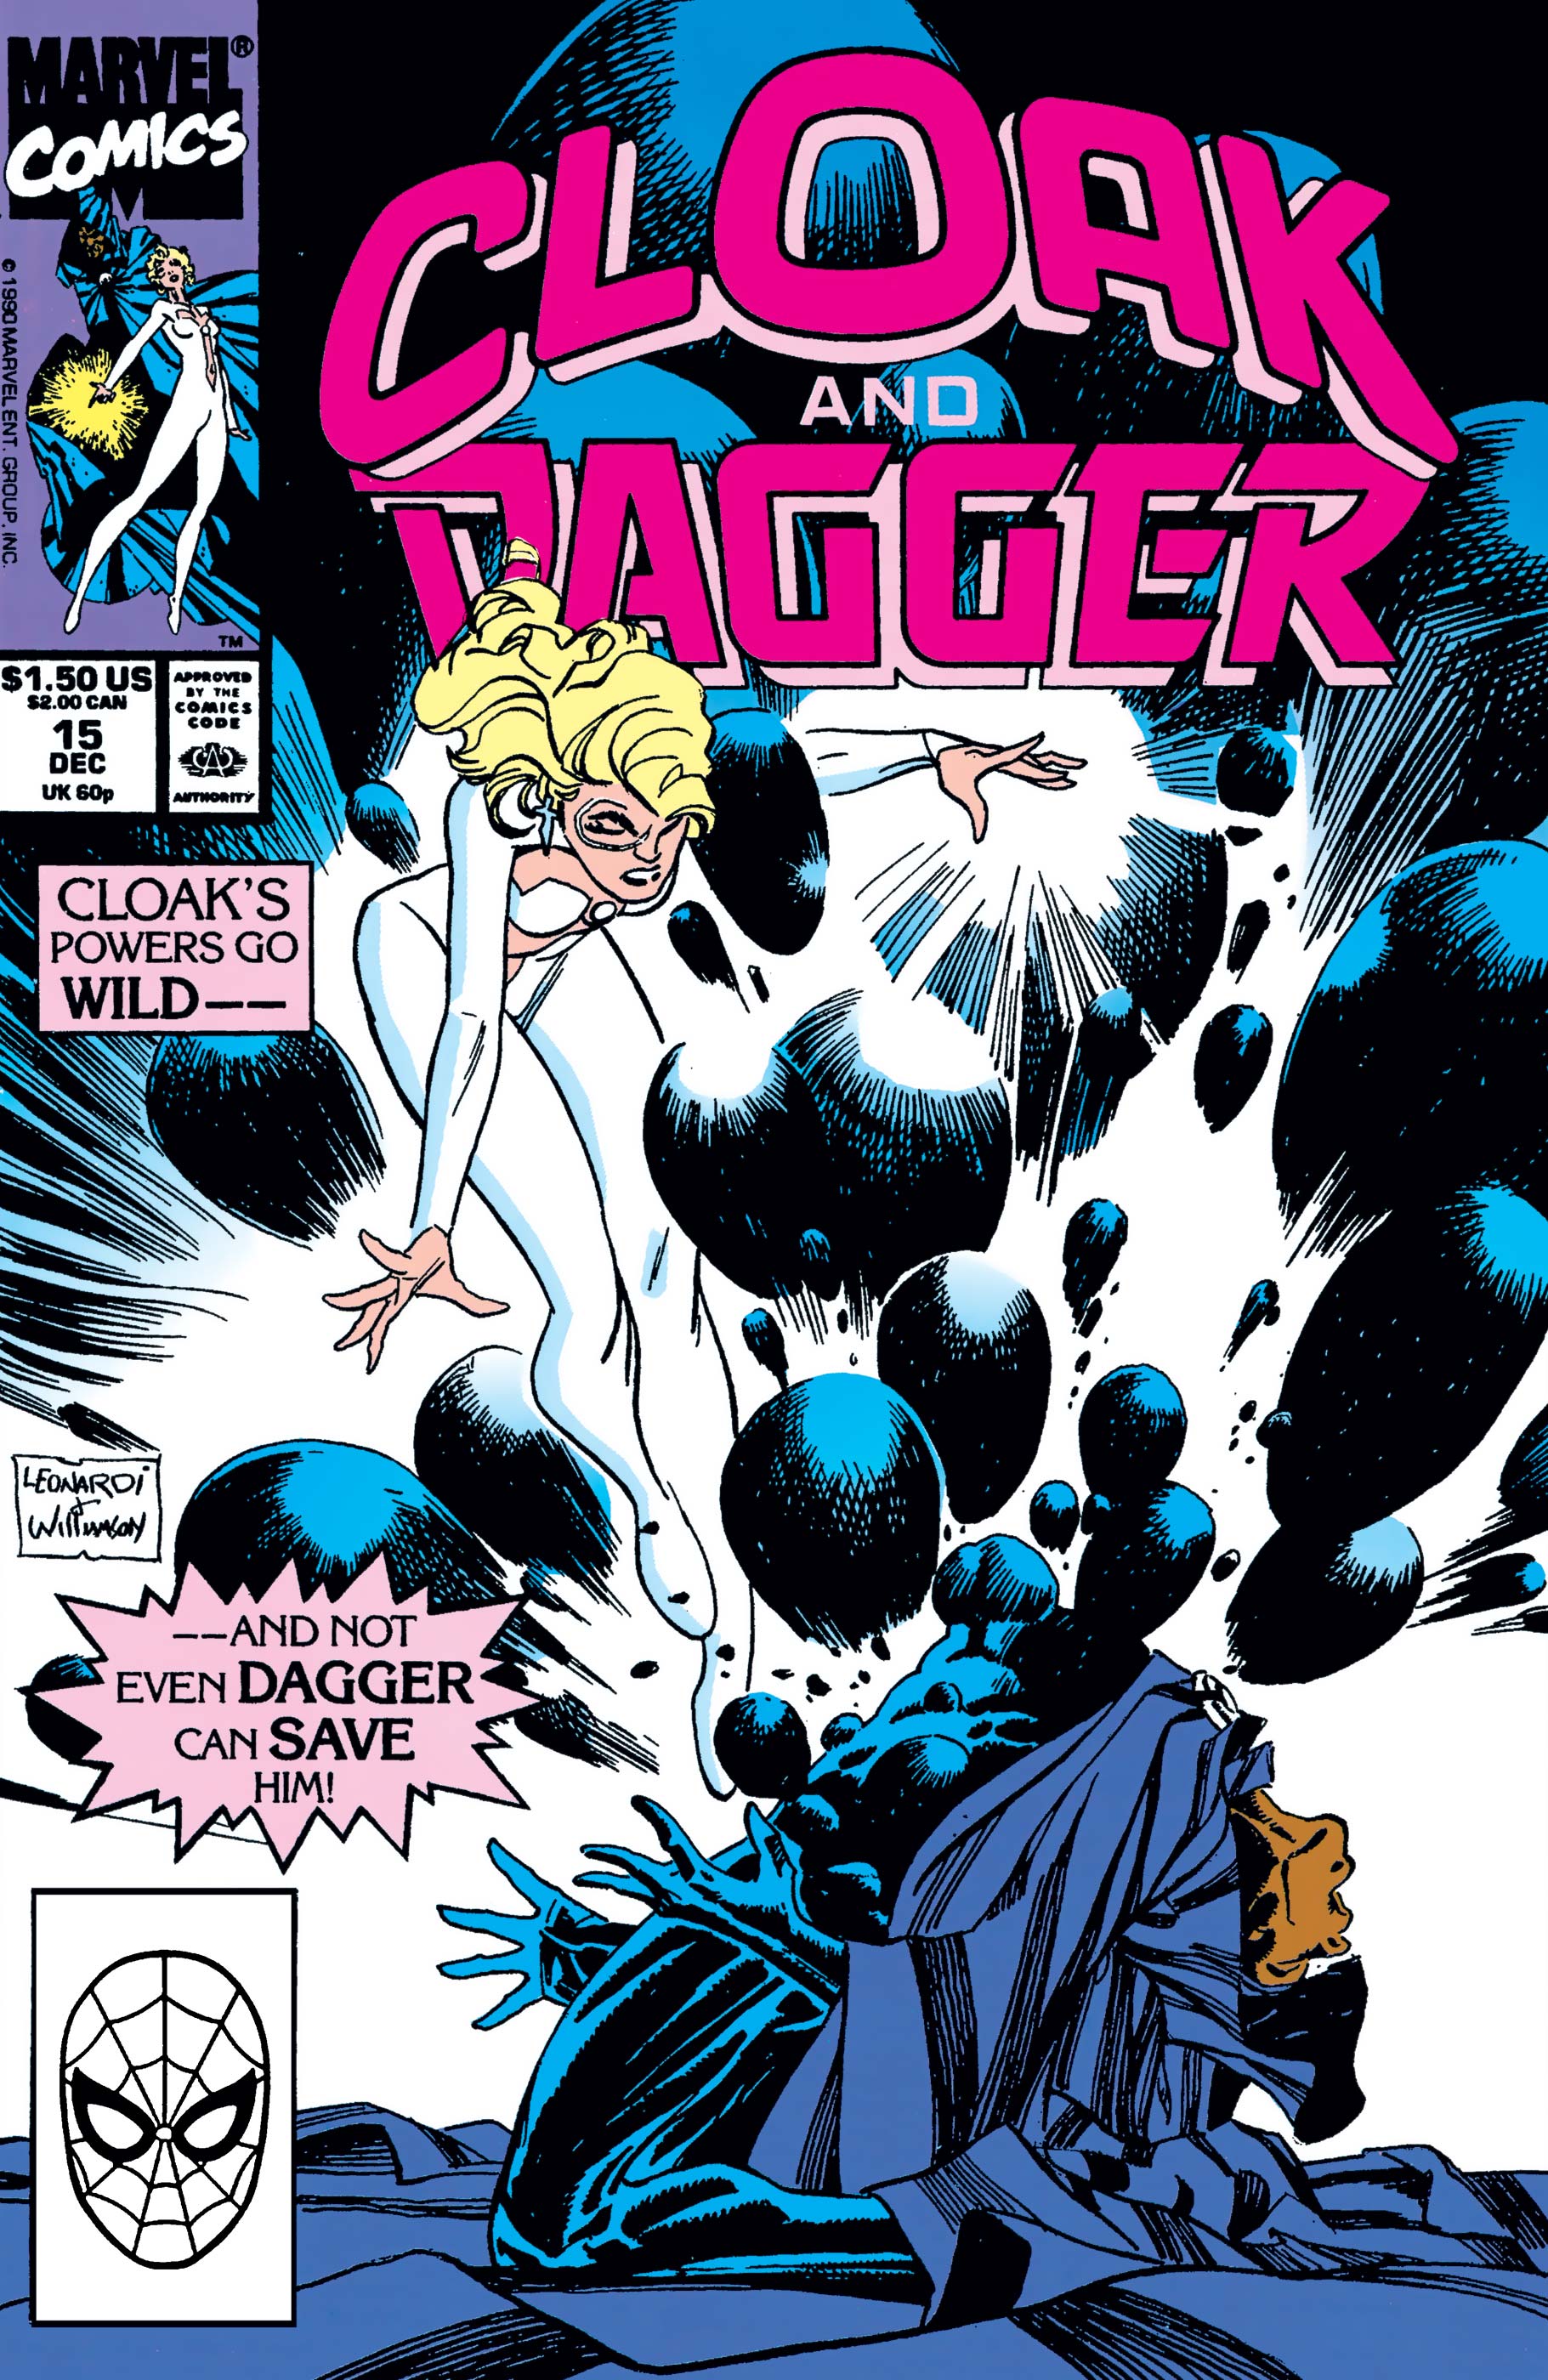 The Mutant Misadventures of Cloak and Dagger (1988) #15